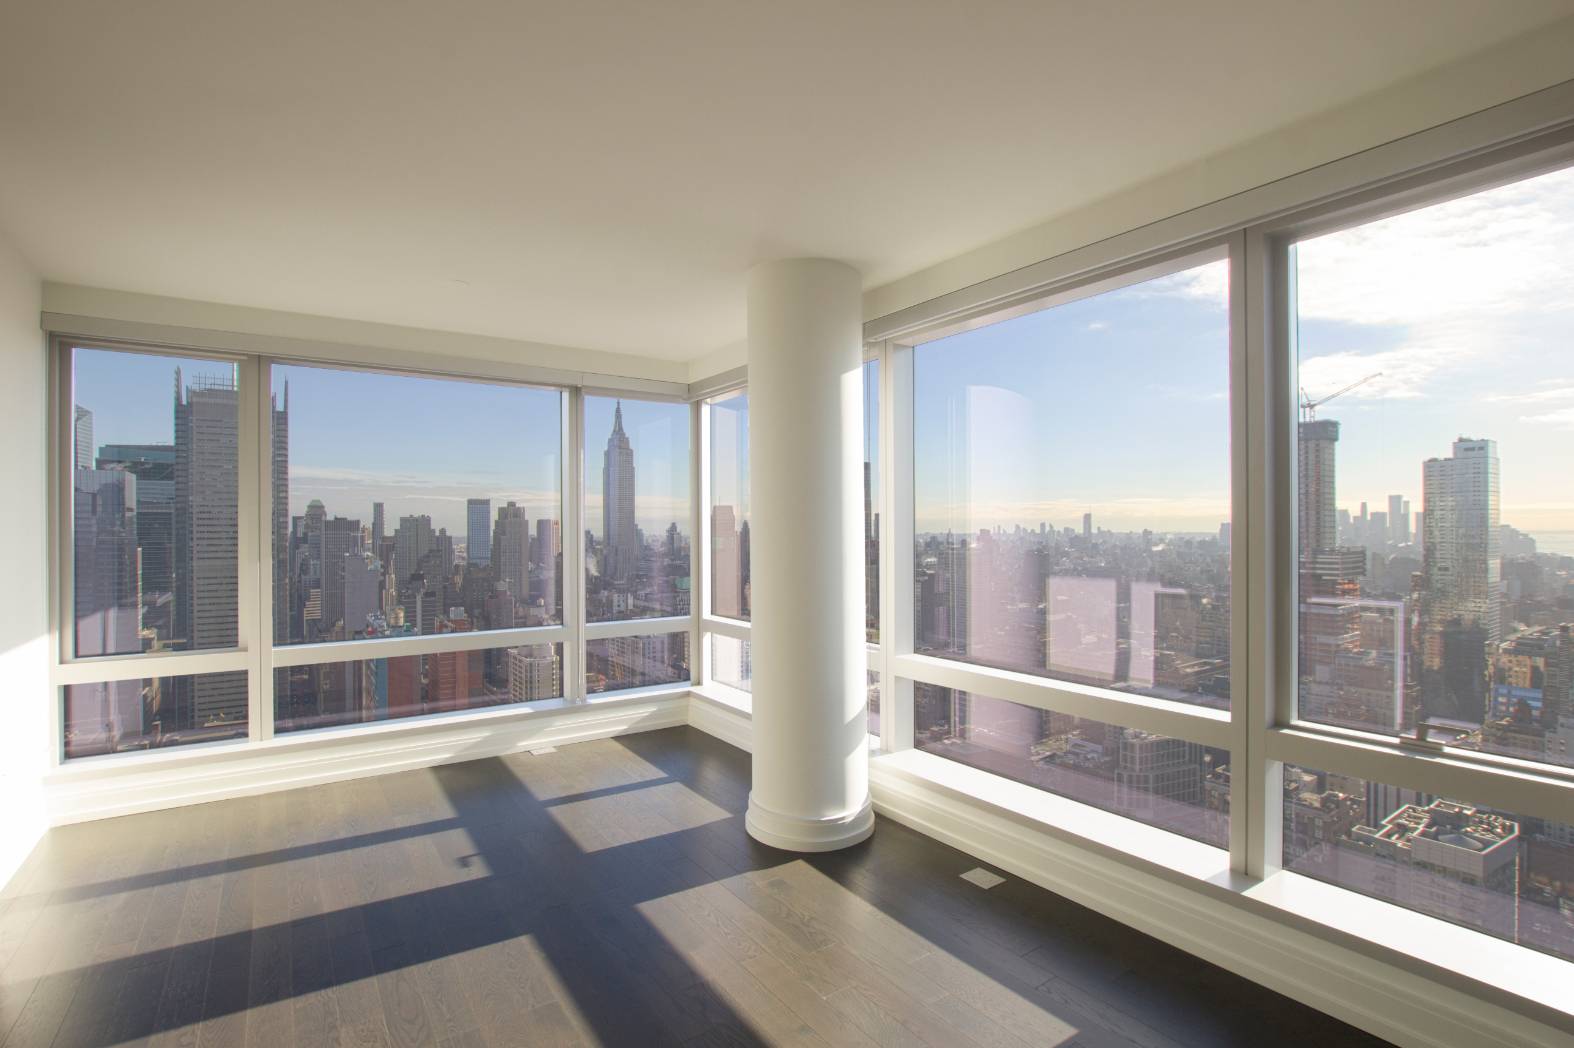 Welcome home to this corner 2 bedroom, 2 bath residence at 555TEN in Hudson Yards.